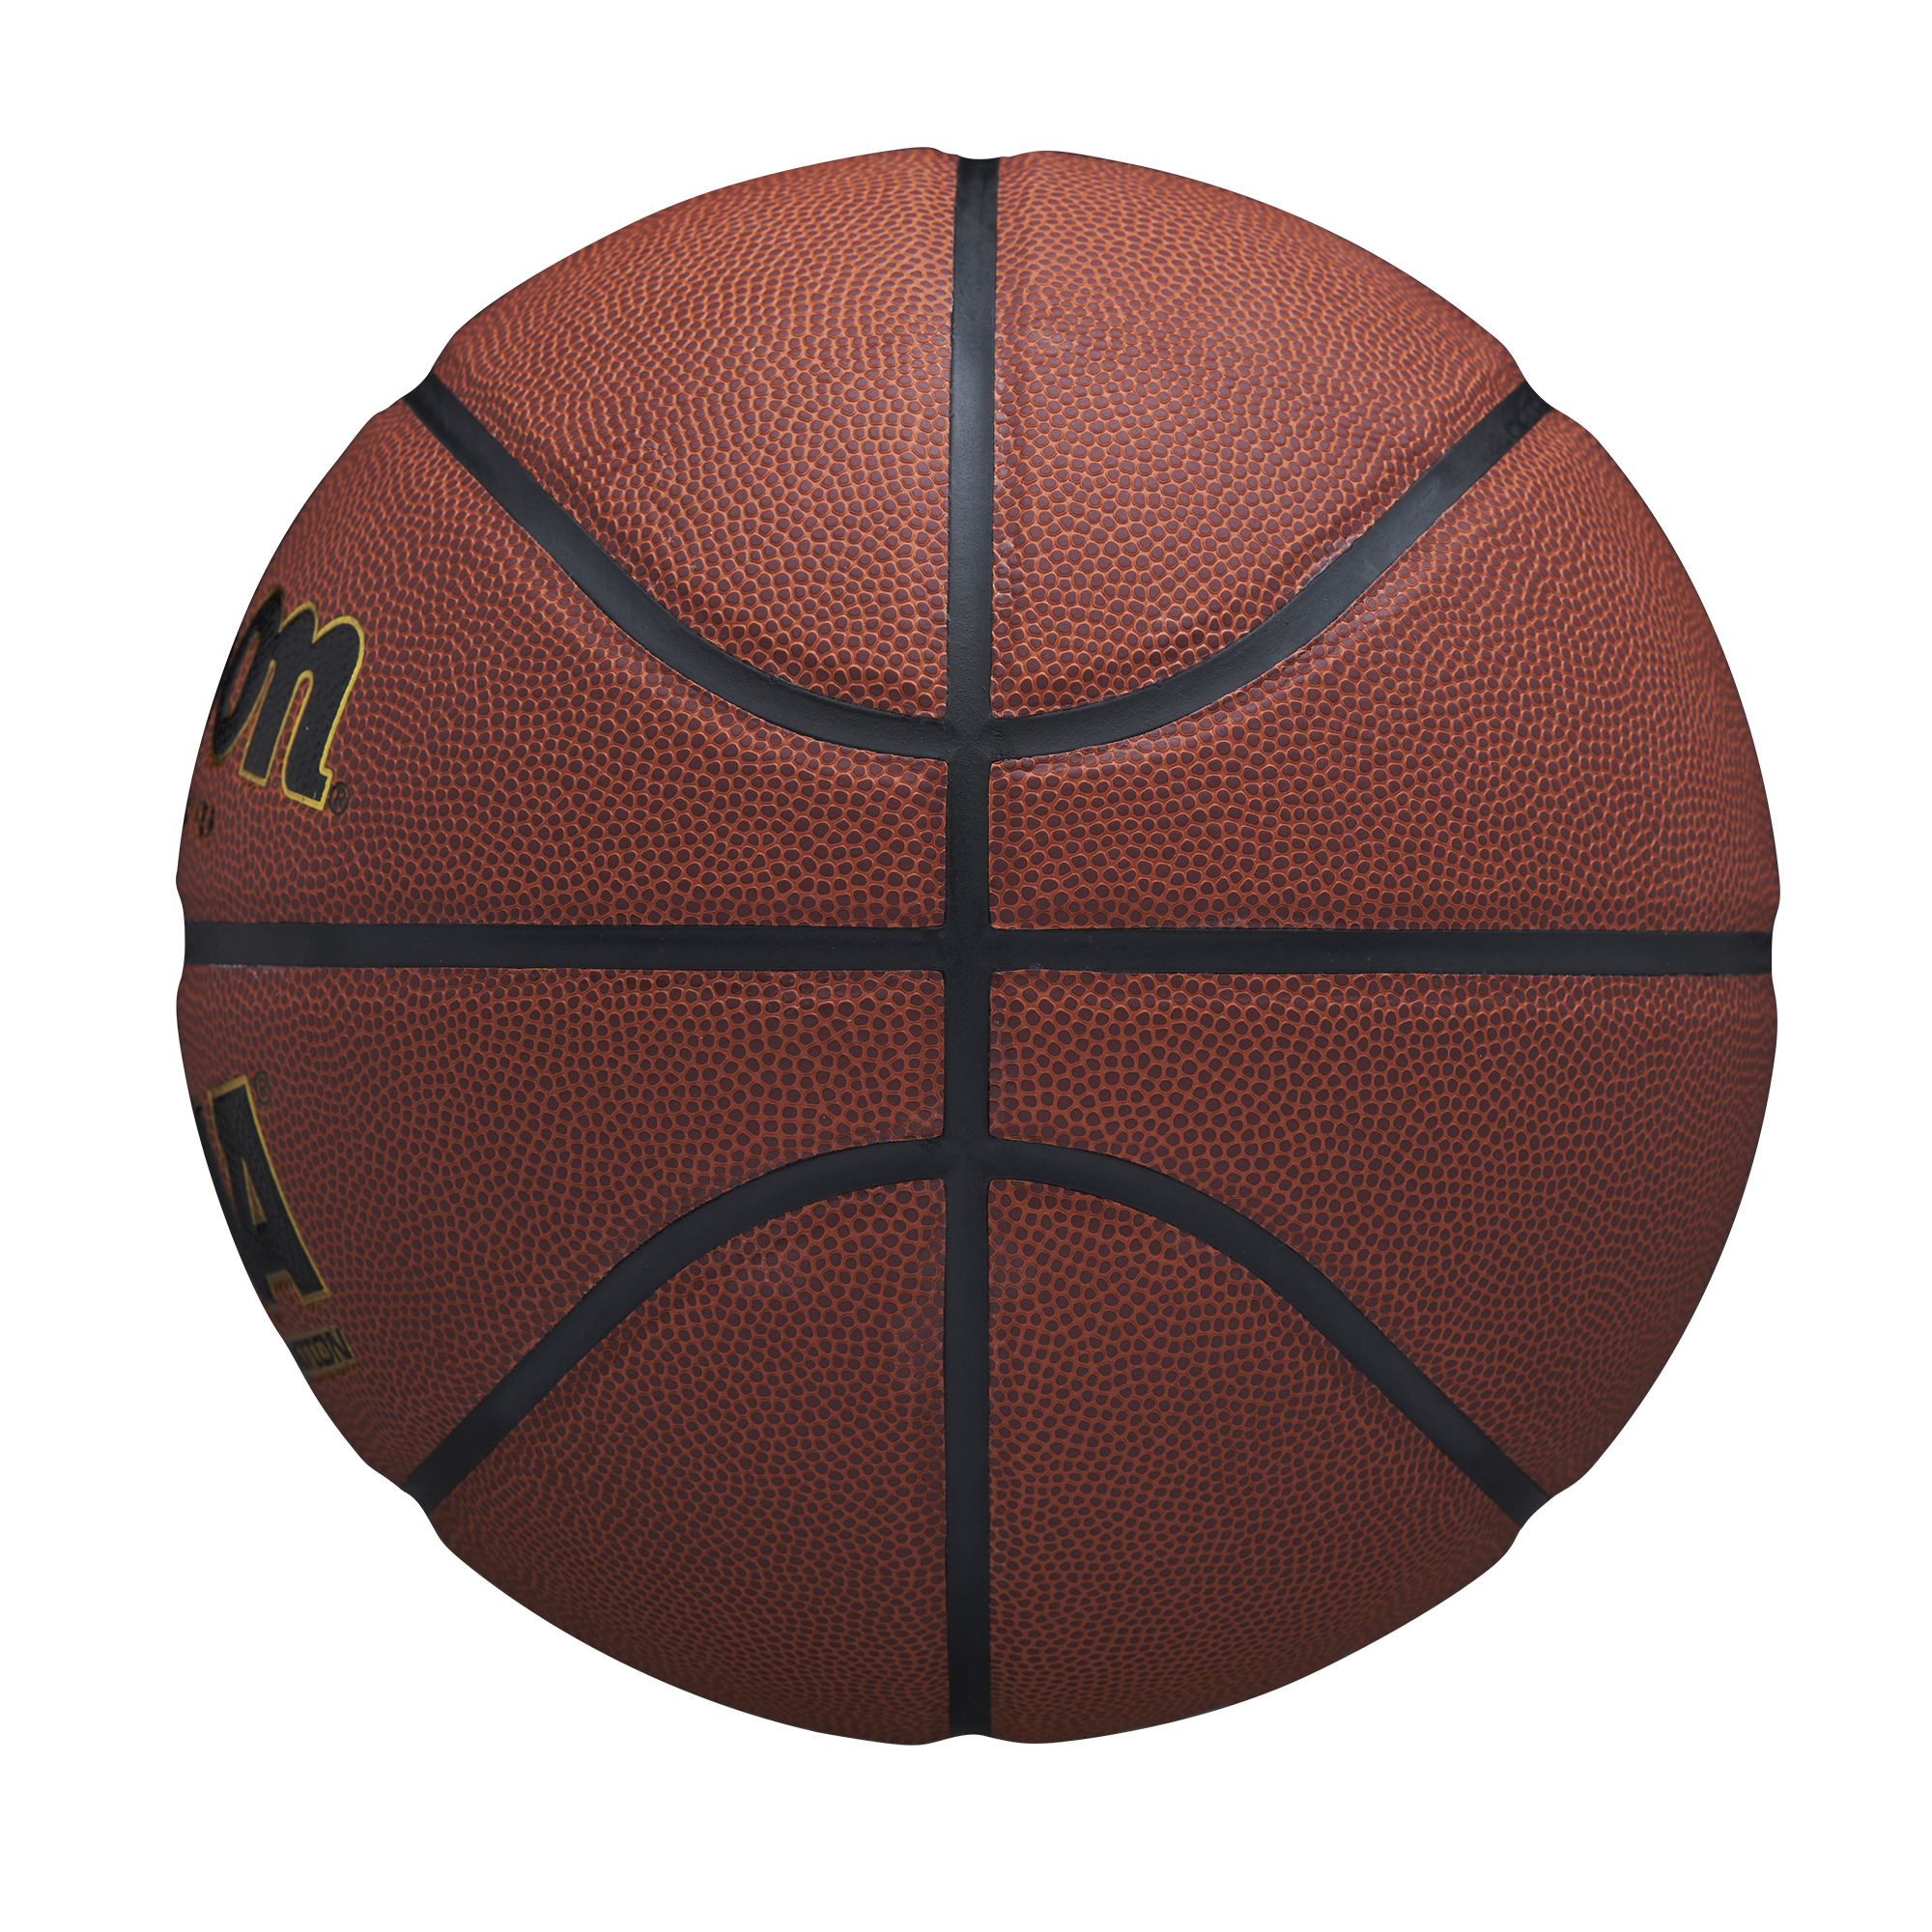 Wilson NCAA Final Four Edition Basketball, Official Size - 29.5" - image 4 of 7